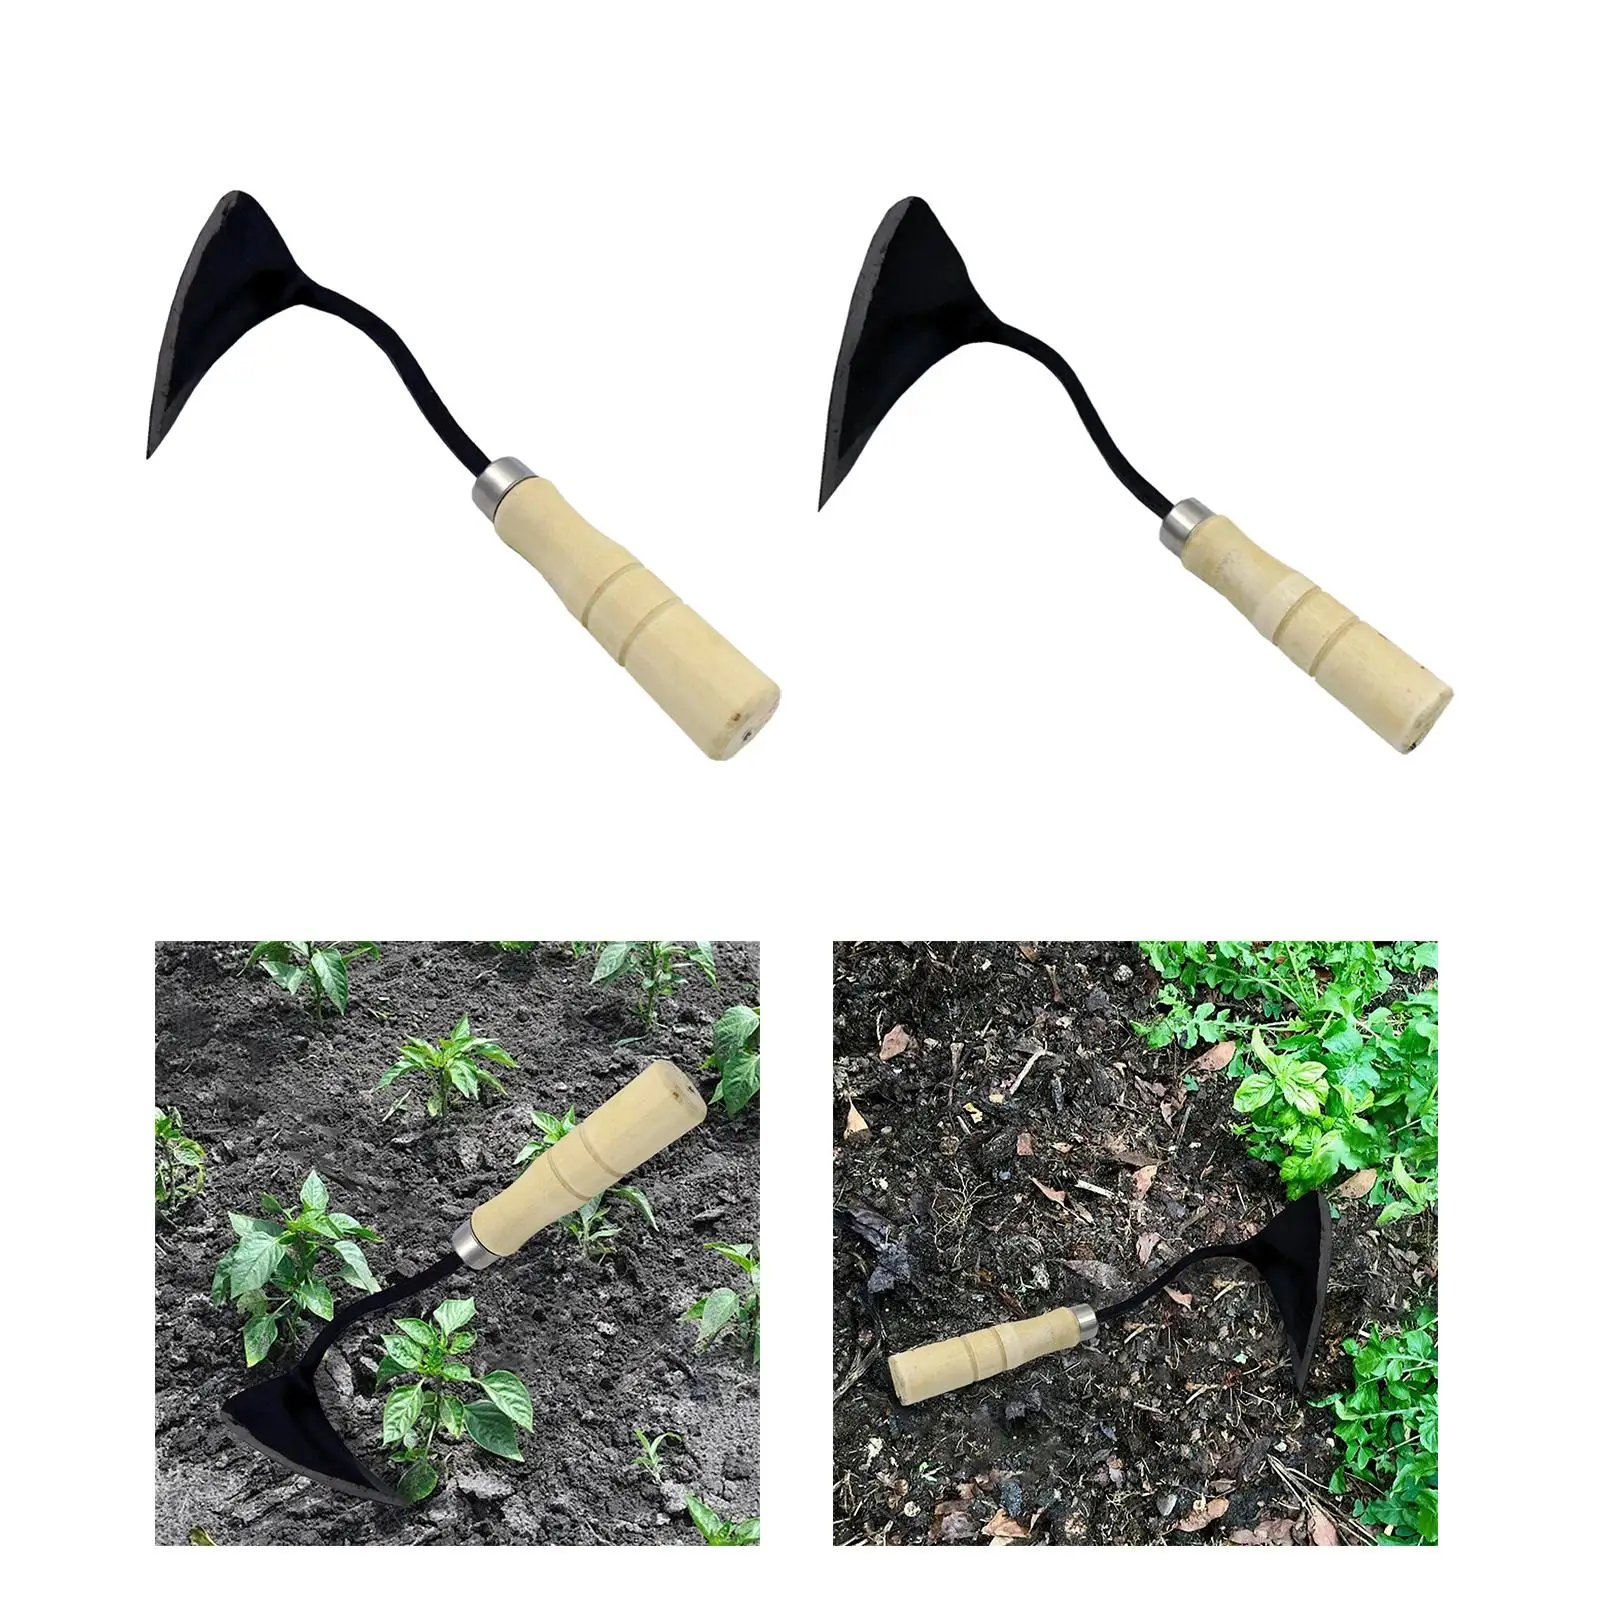 Plow Hoe Puller Farming Tool Easy Digging Save Labor Potato Digger Tools for Kids and Adults Garden Lawn Yard Flowers